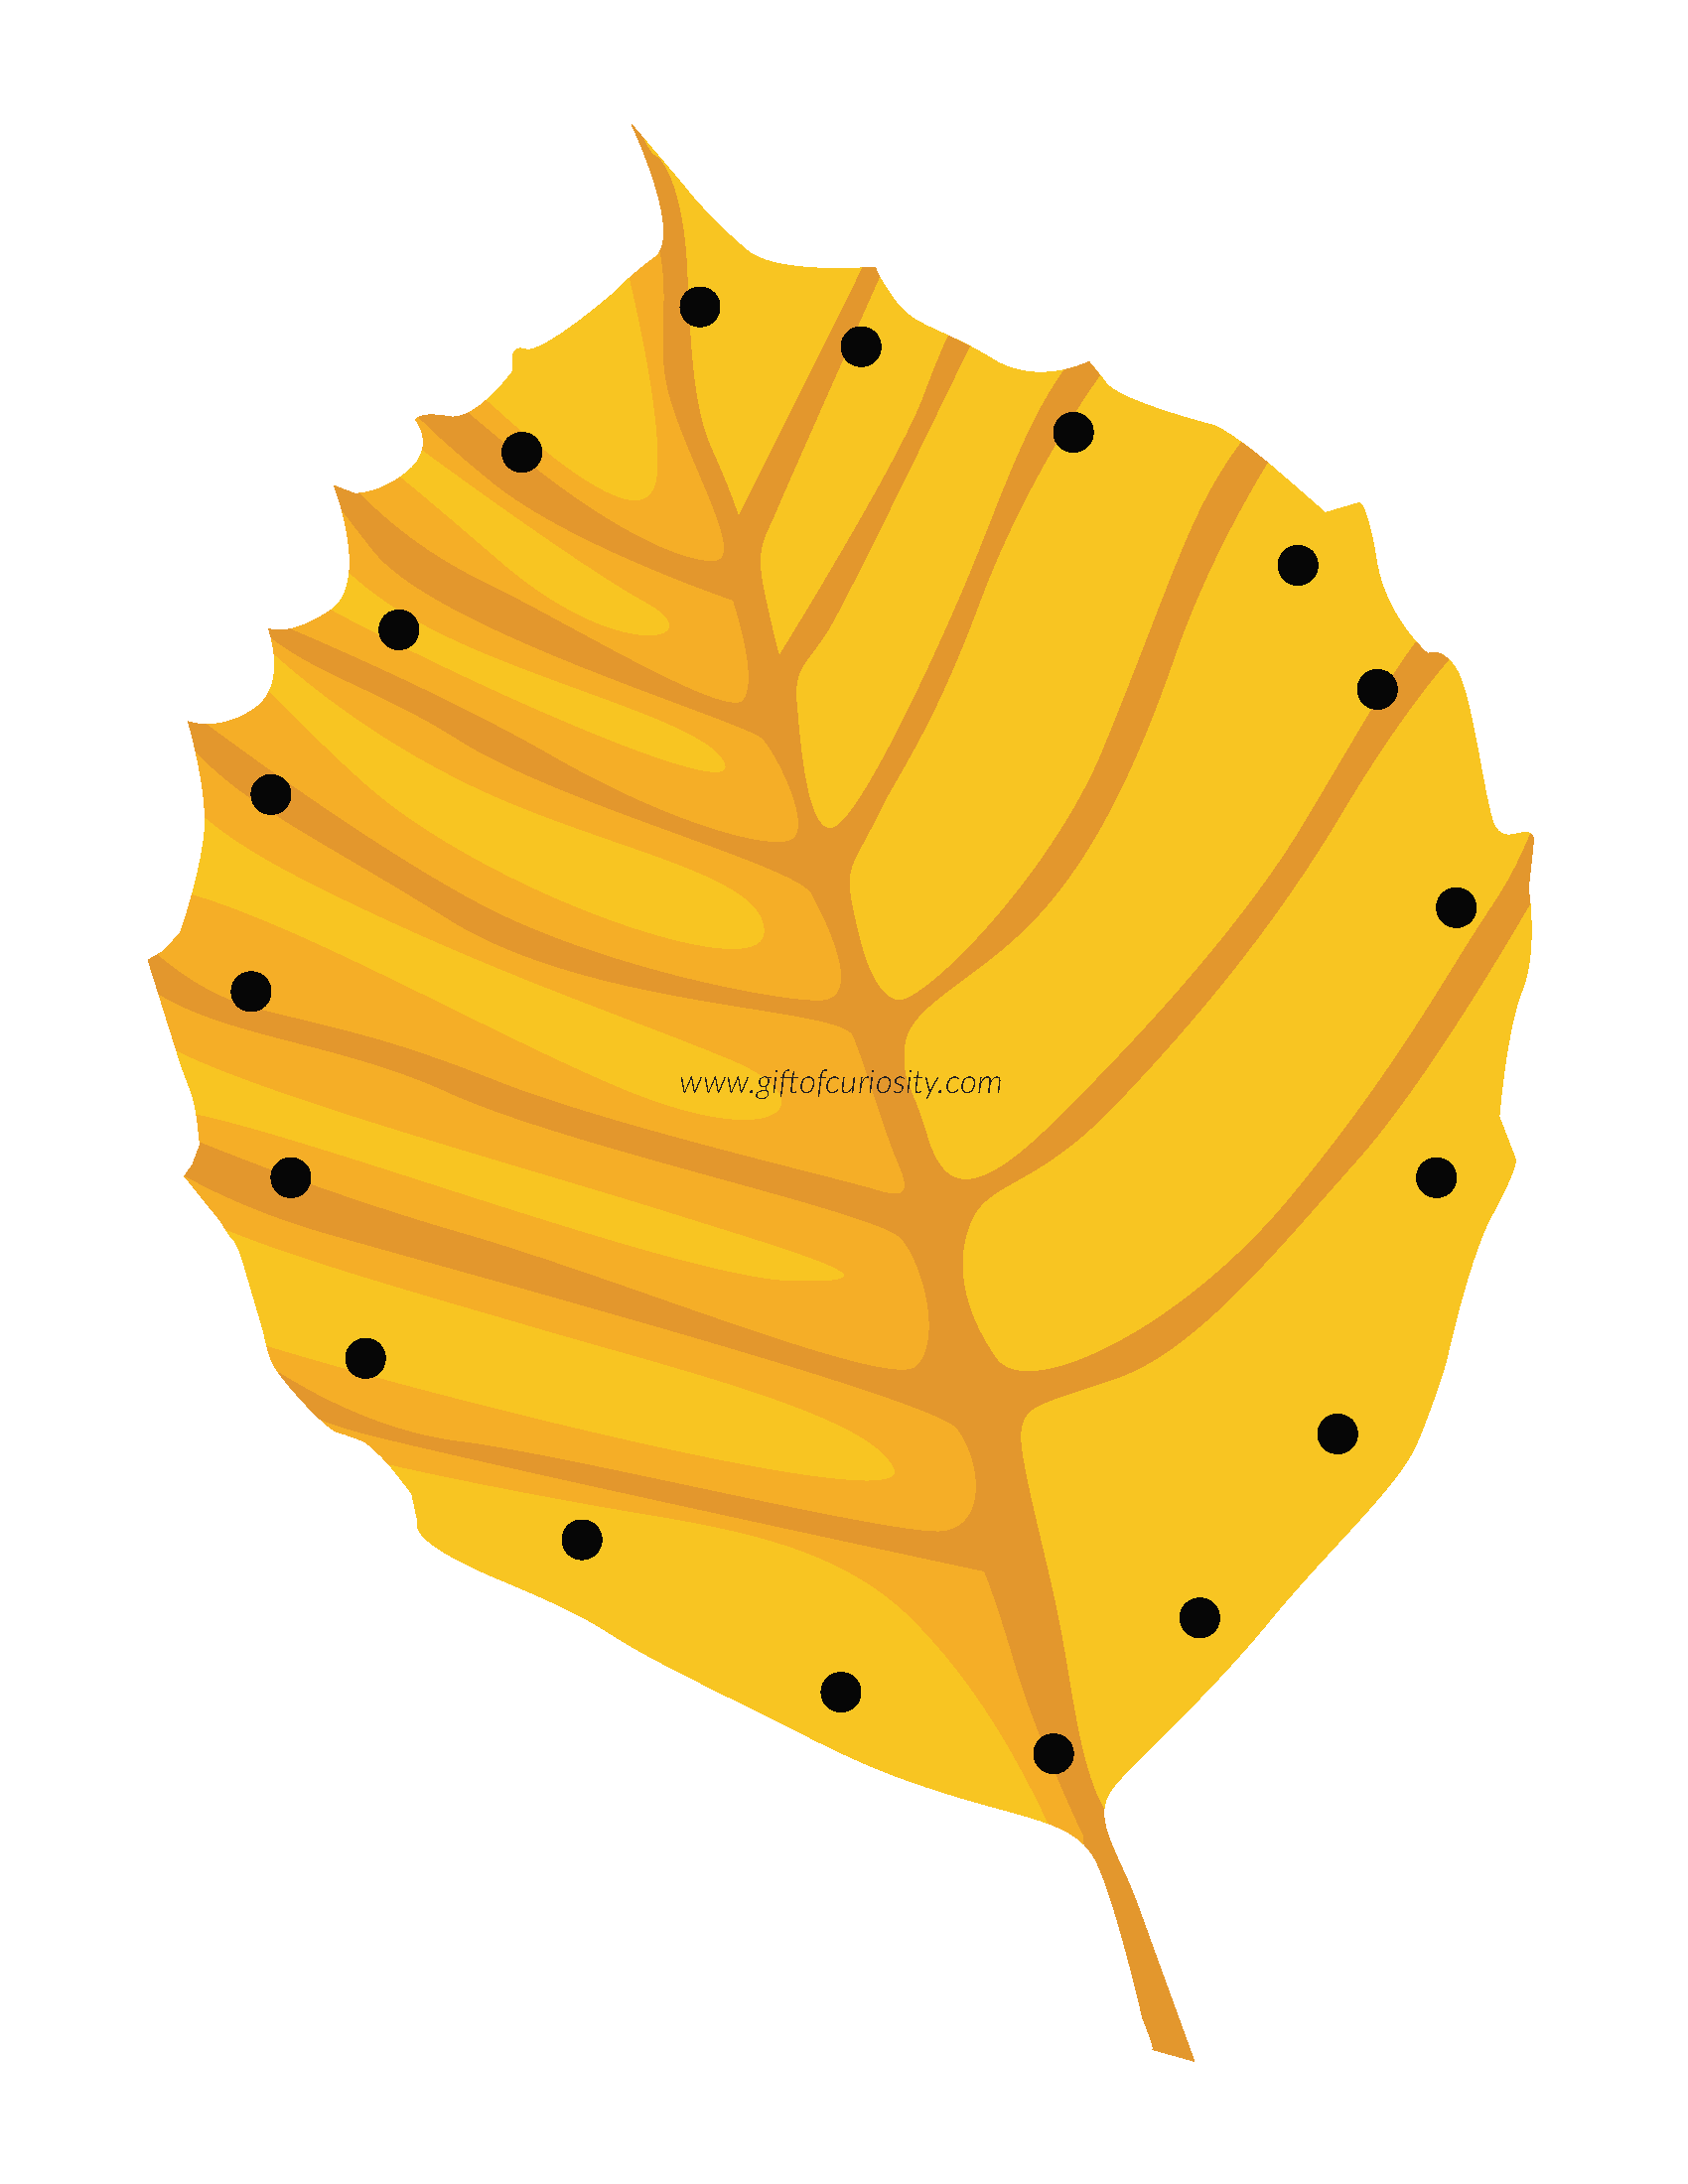 Fall Leaf Lacing Cards - Gift of Curiosity